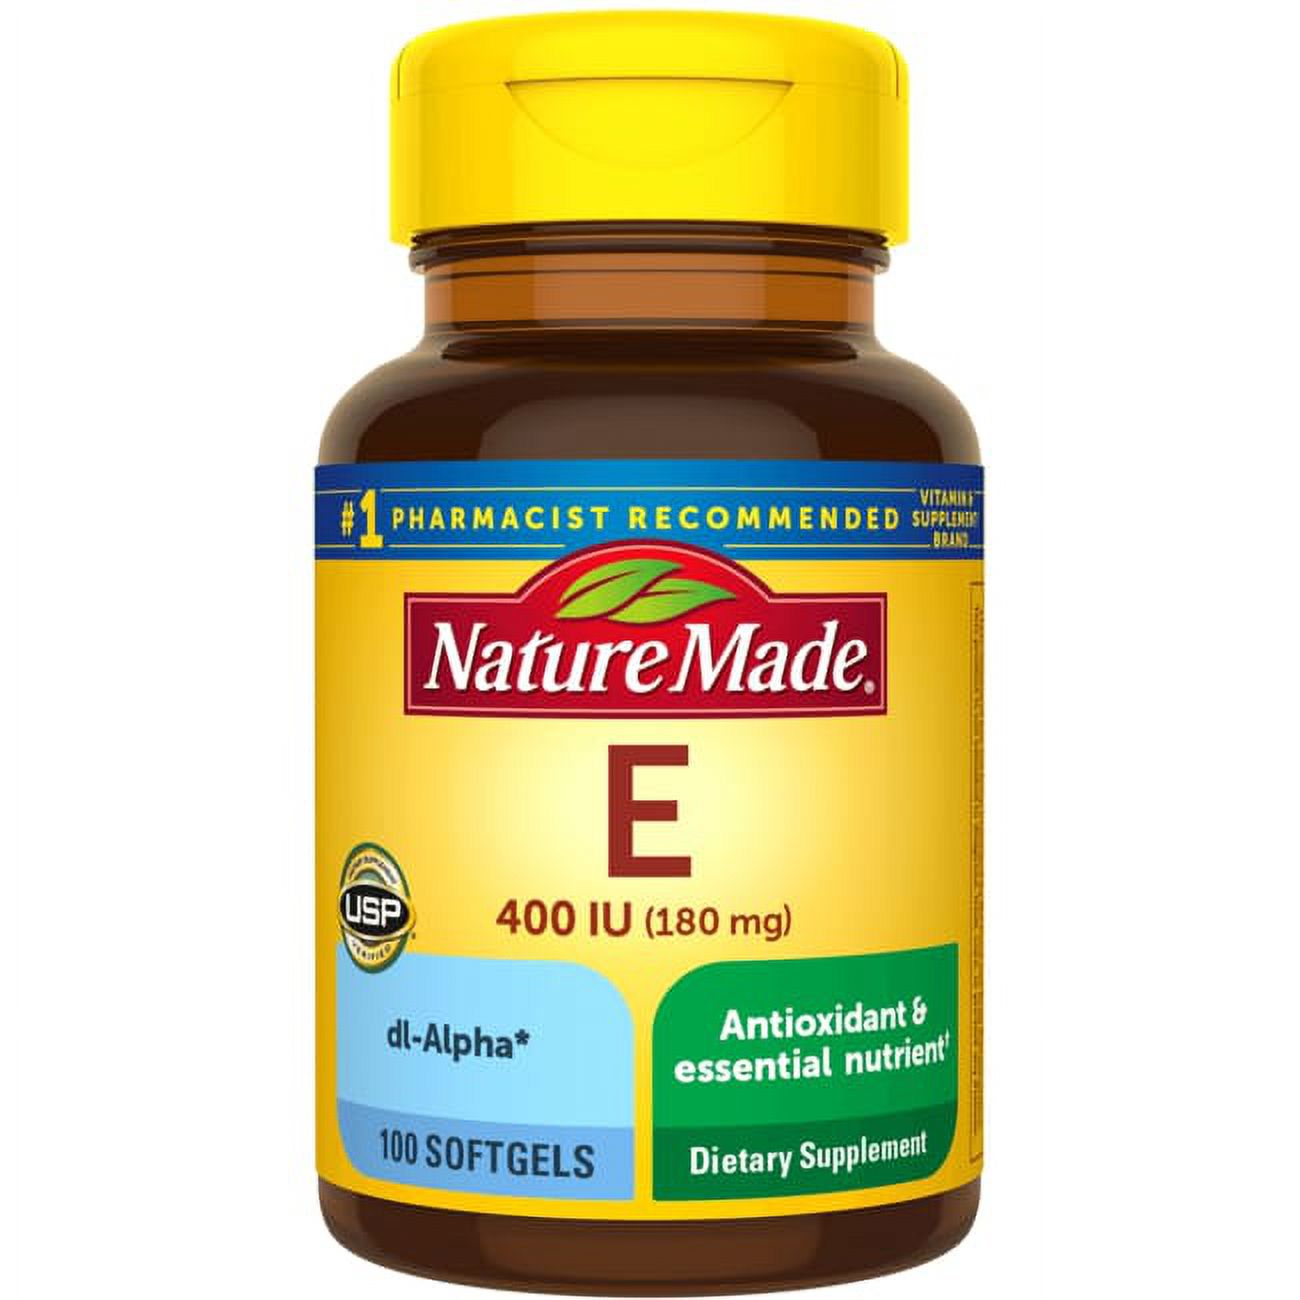 Nature Made Vitamin E 180 mg (400 IU) dl-Alpha Softgels, Dietary Supplement, 100 Count - image 1 of 4